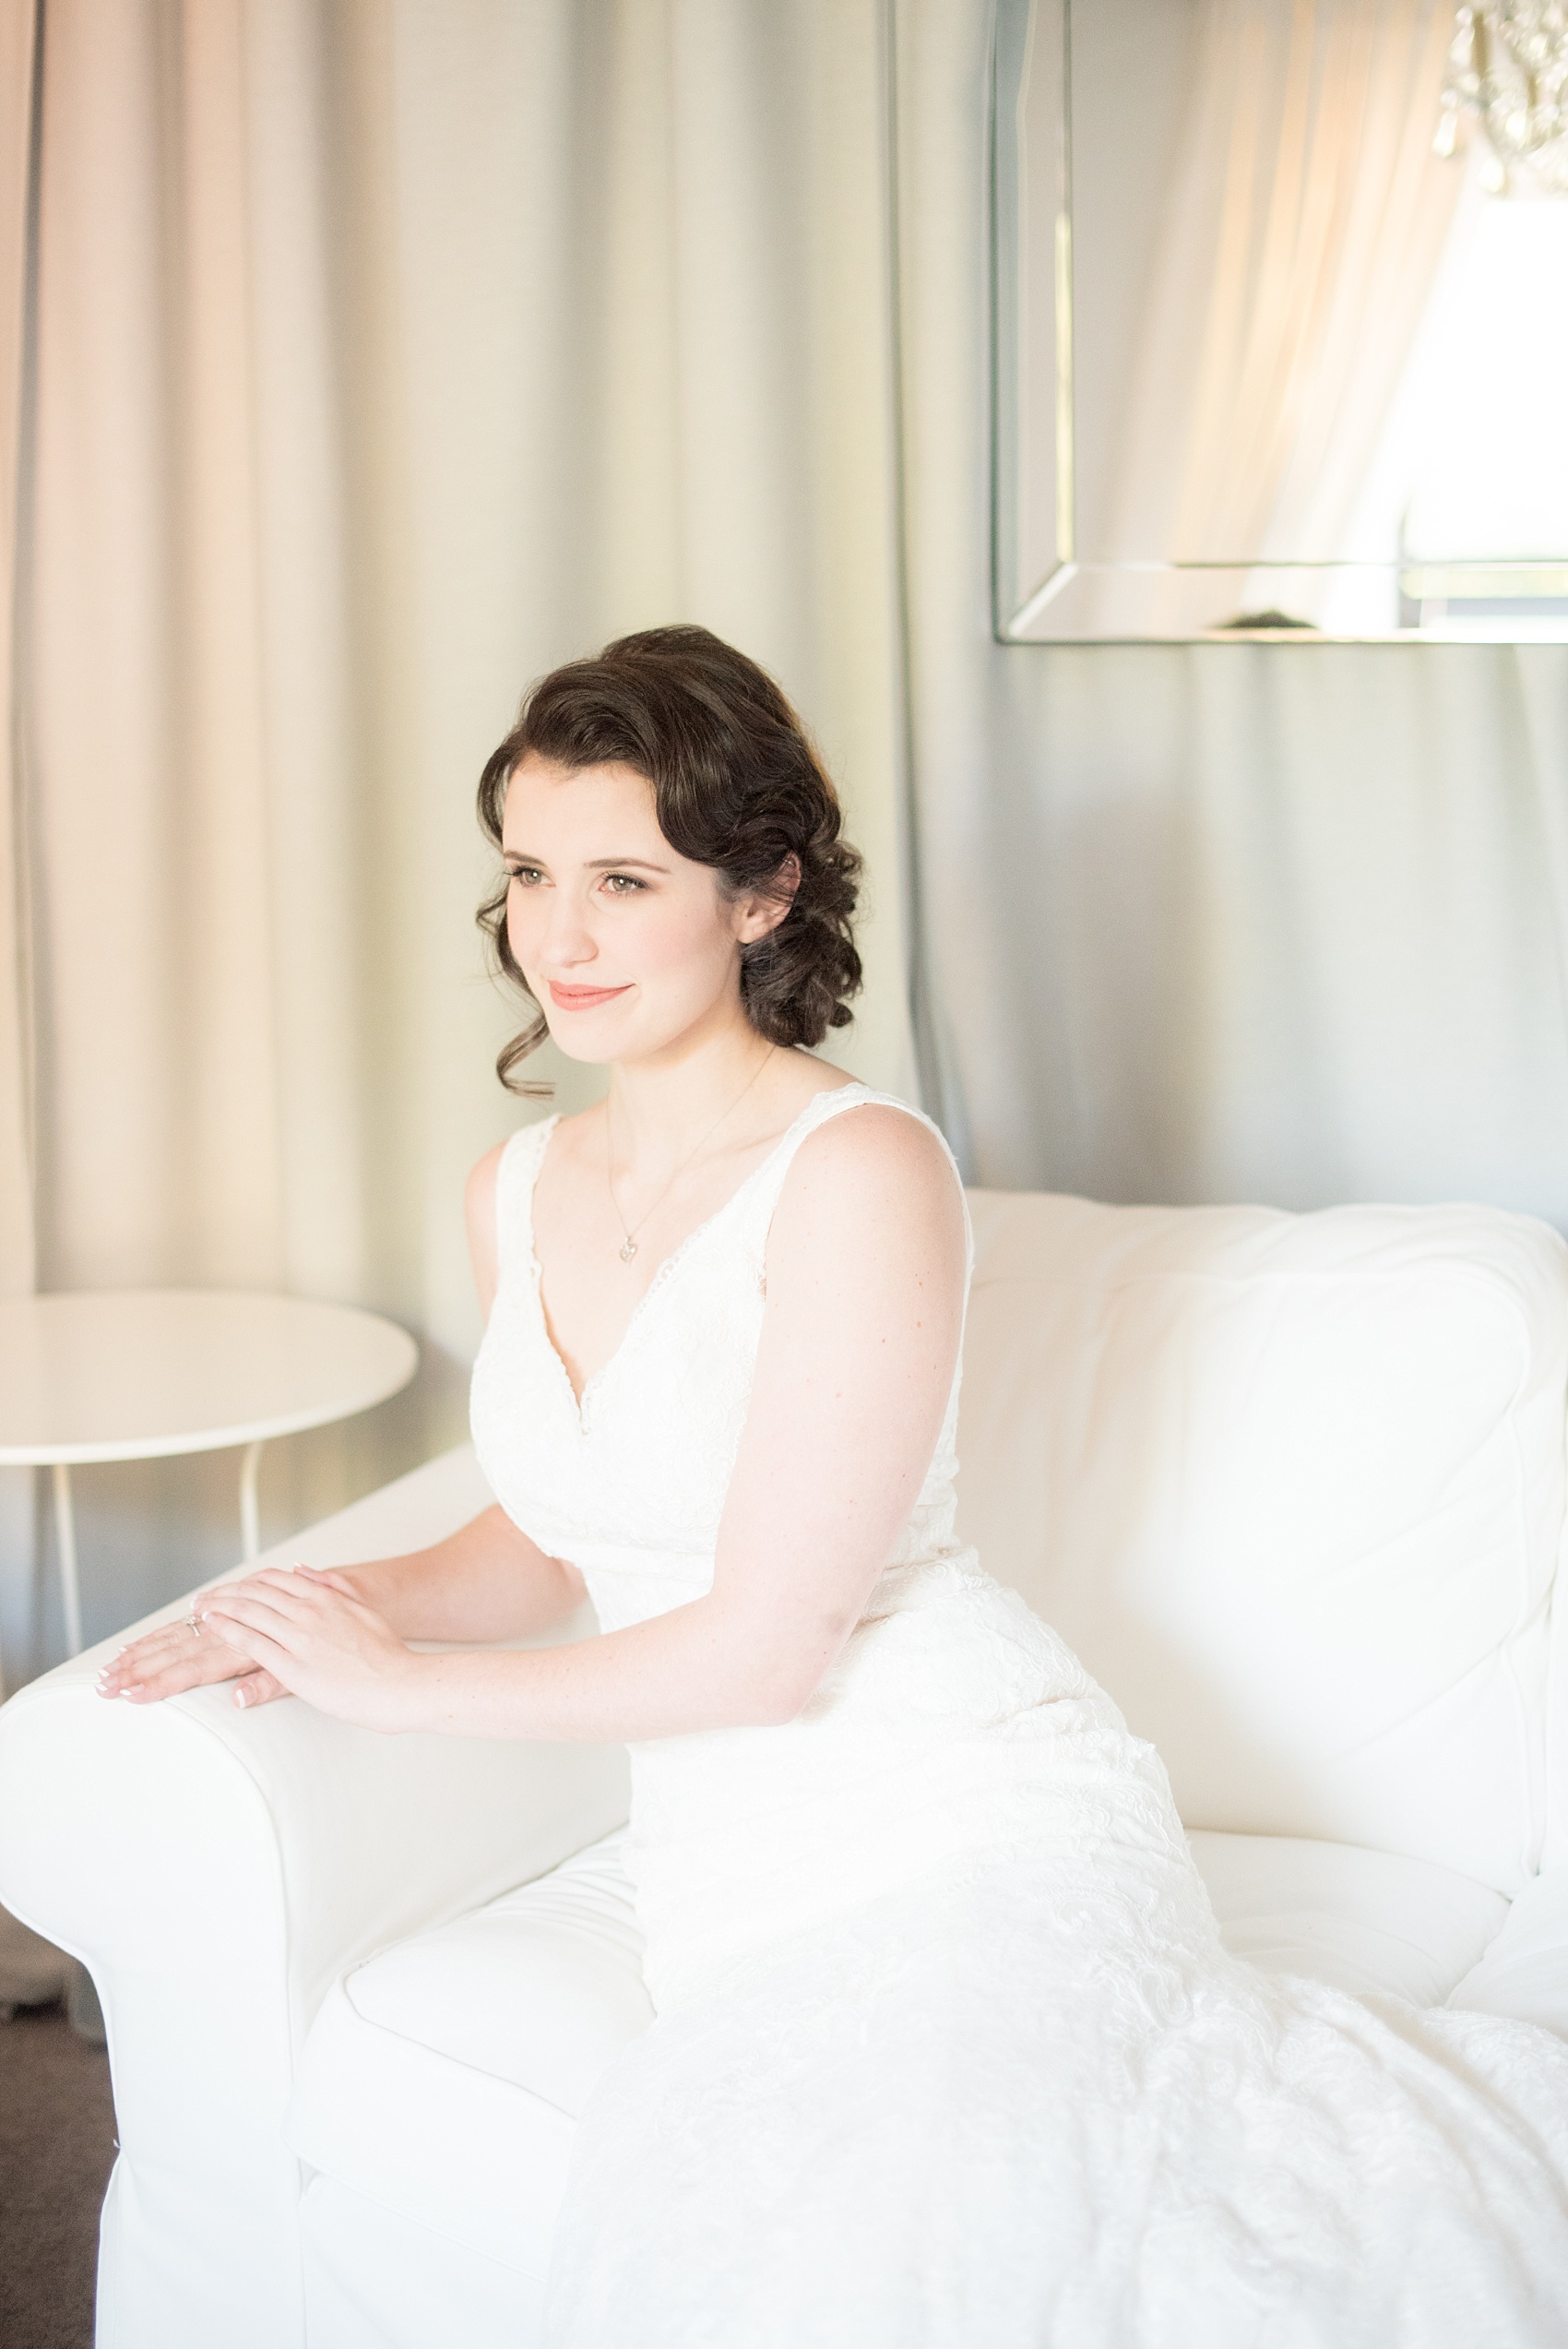 Mikkel Paige Photography photo of a bride in The White Room in downtown Raleigh for a North Carolina wedding.